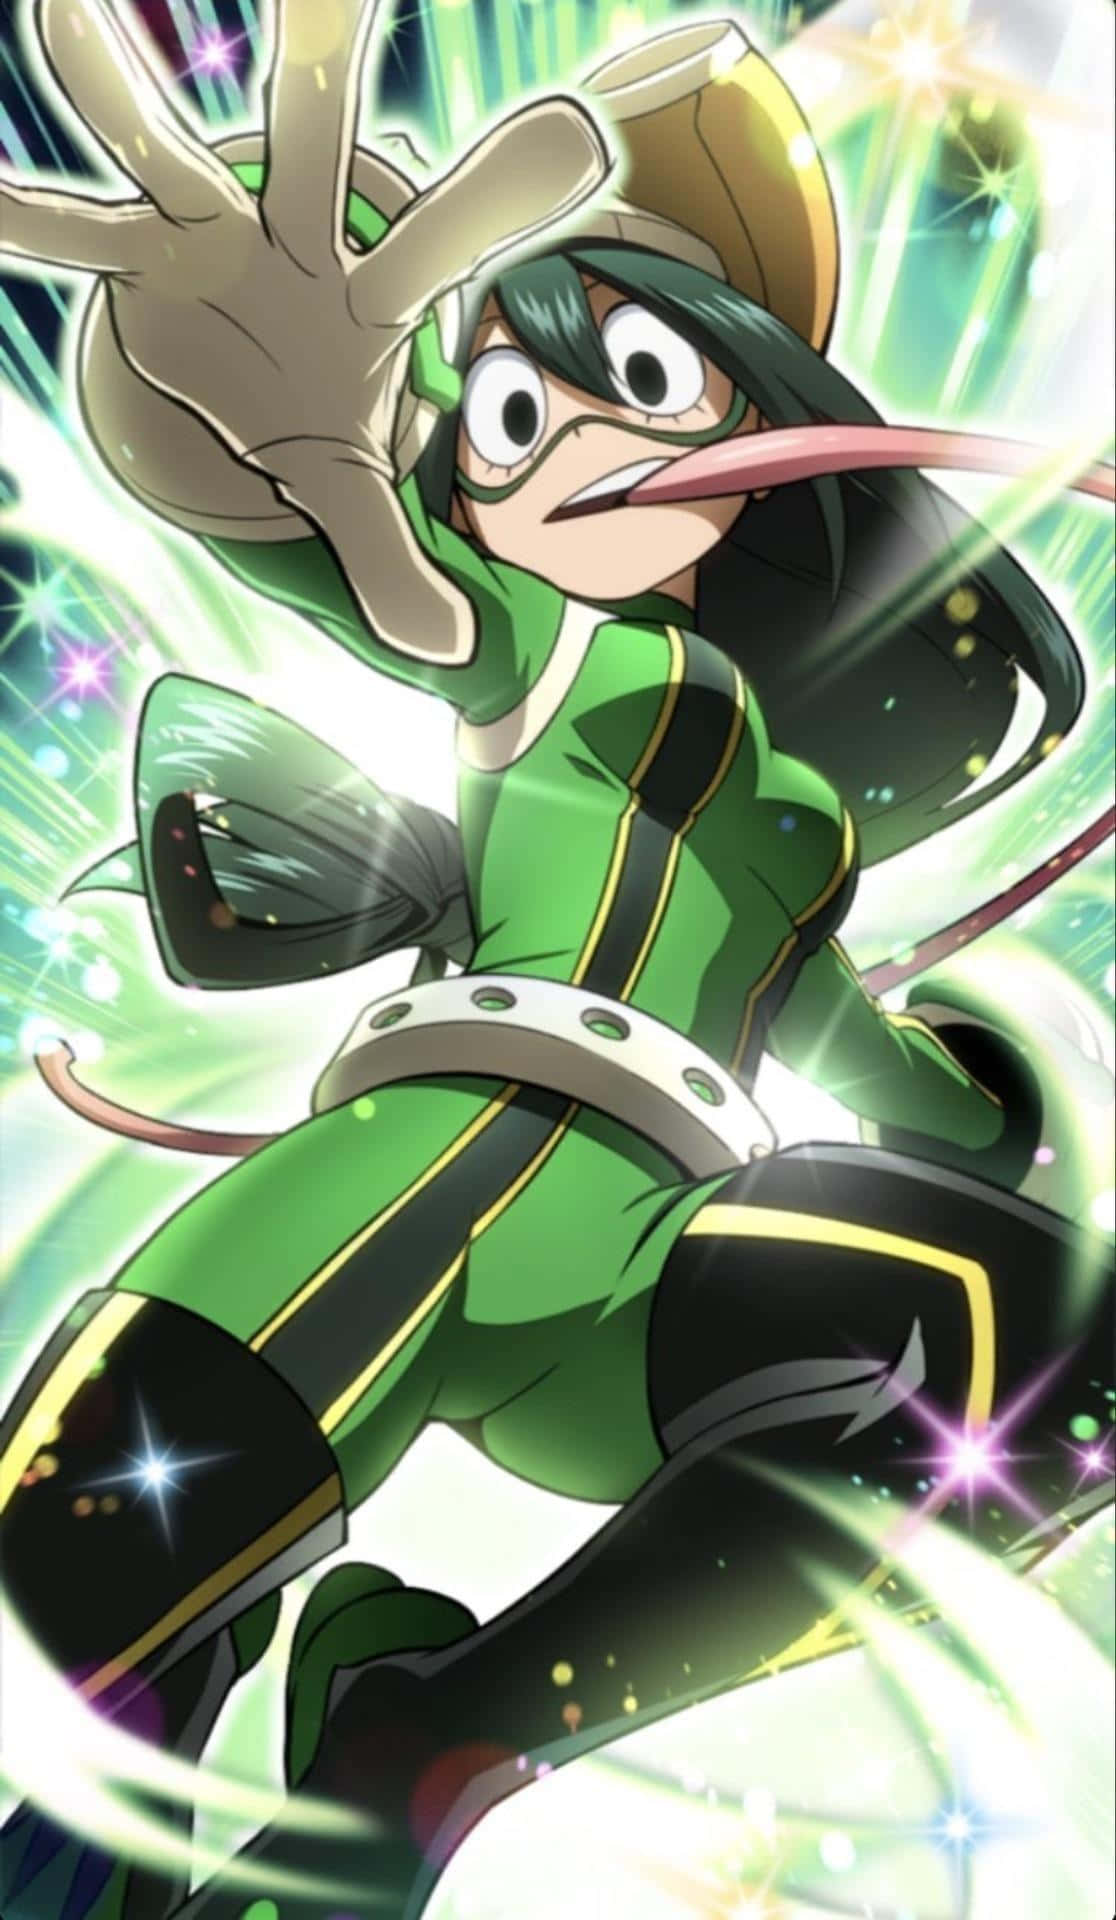 Froppy Spreading Her Wings